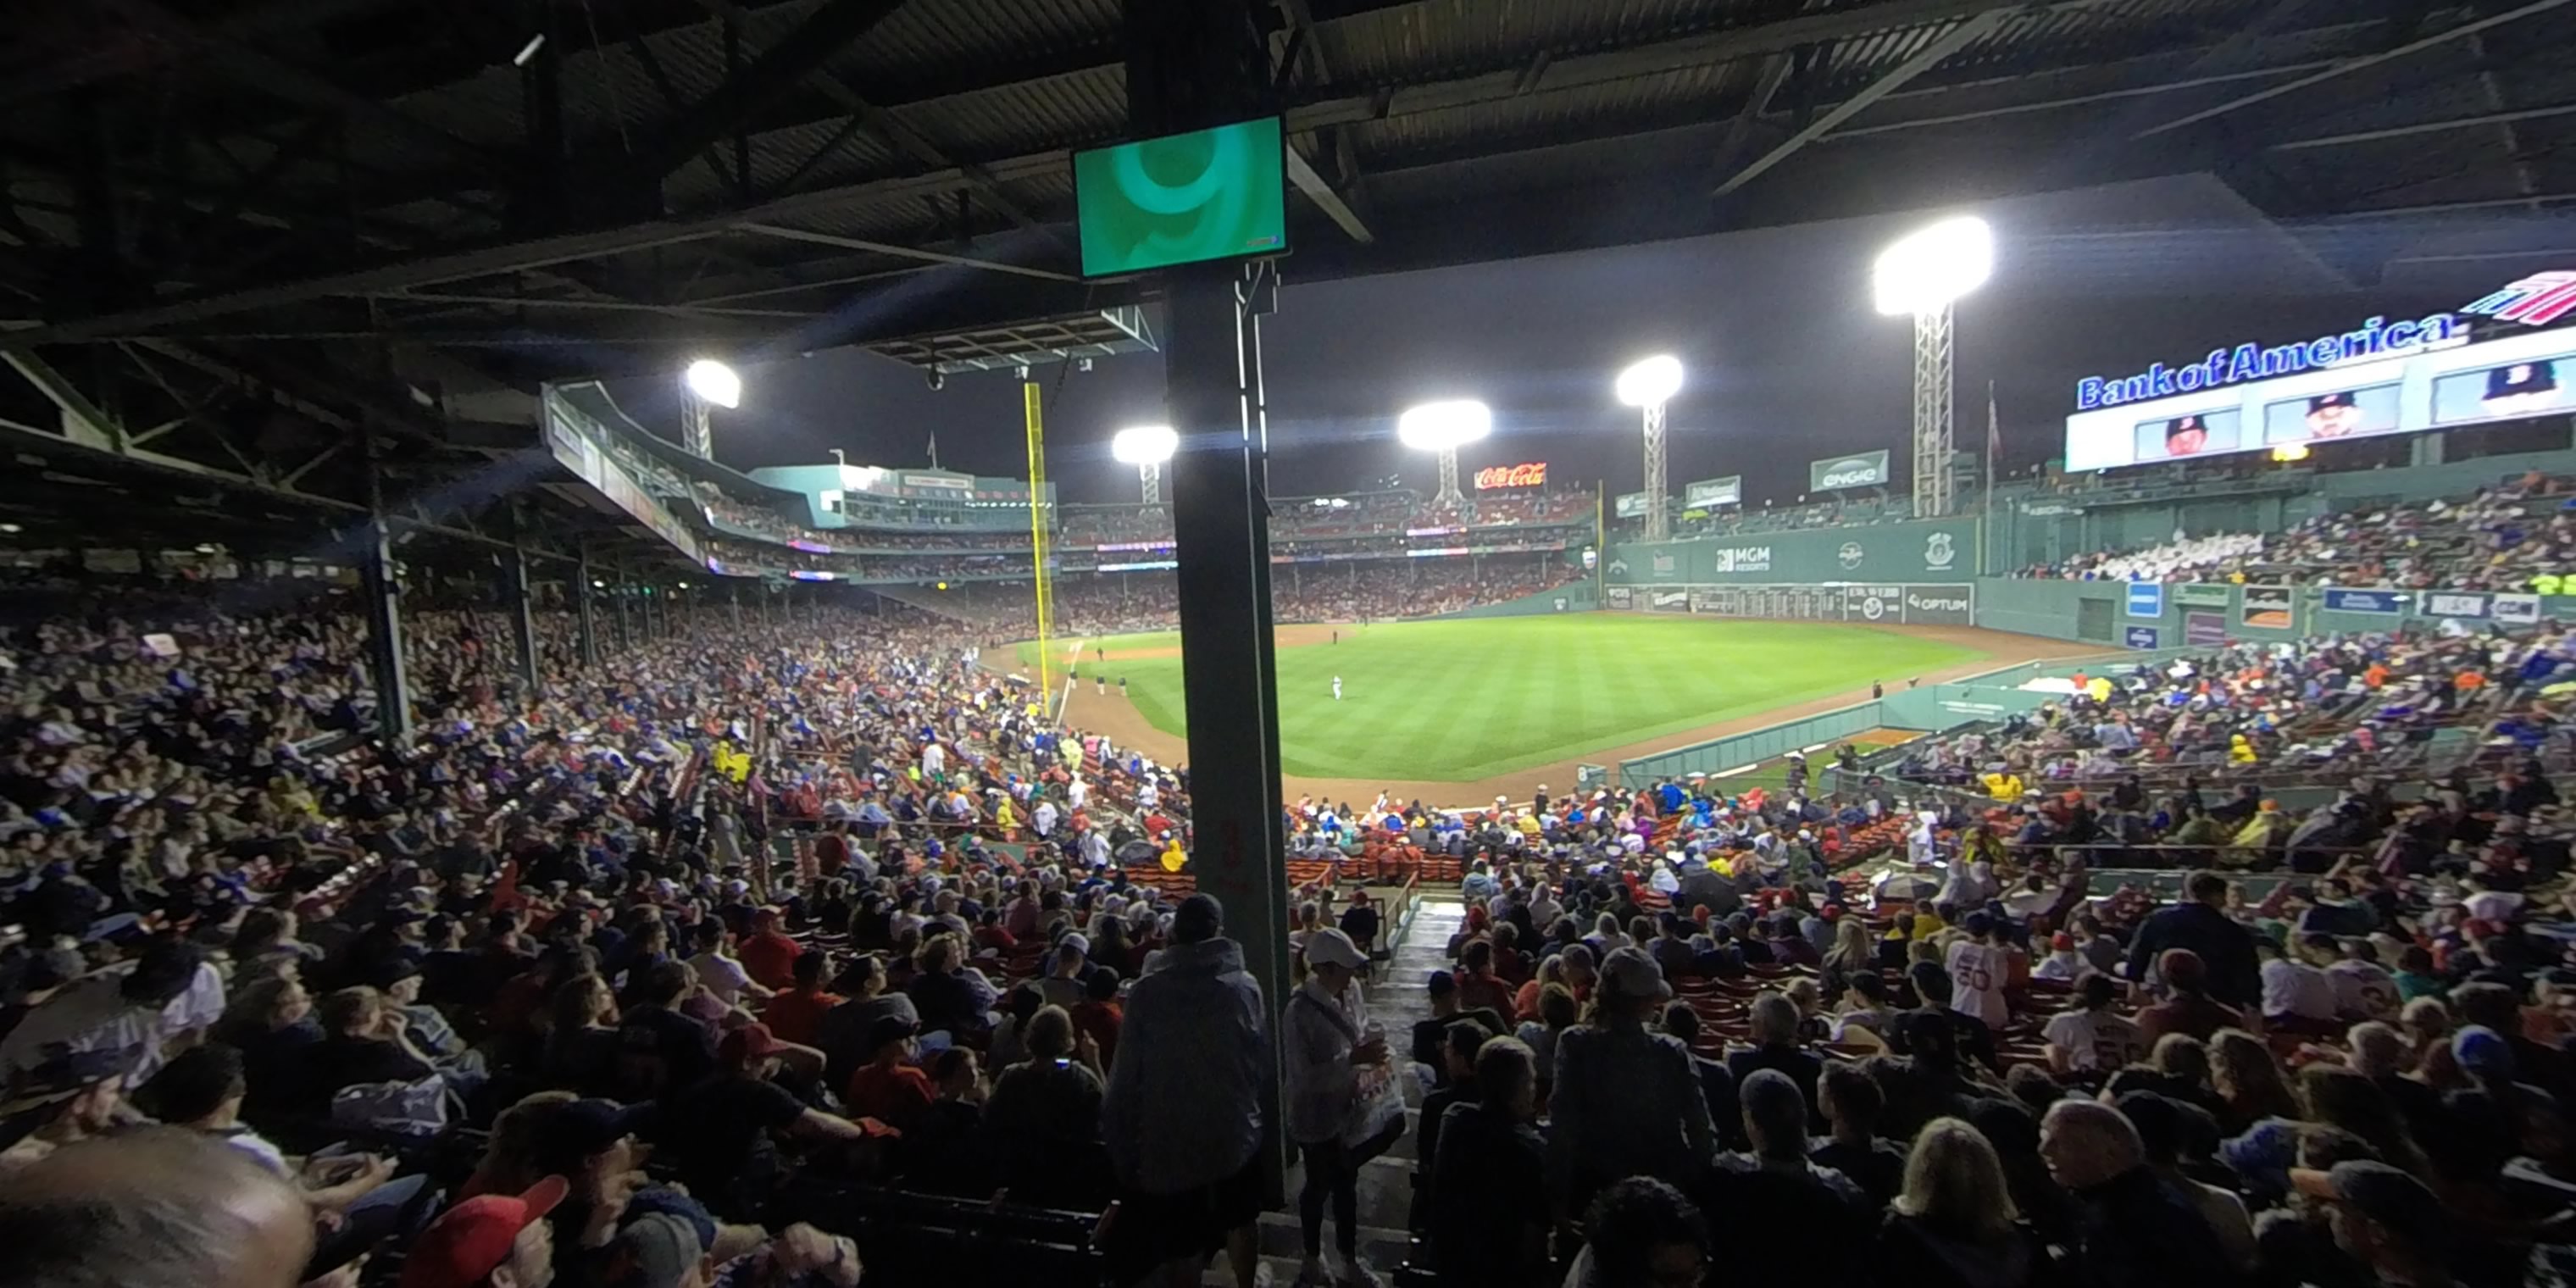 grandstand 3 panoramic seat view  for baseball - fenway park